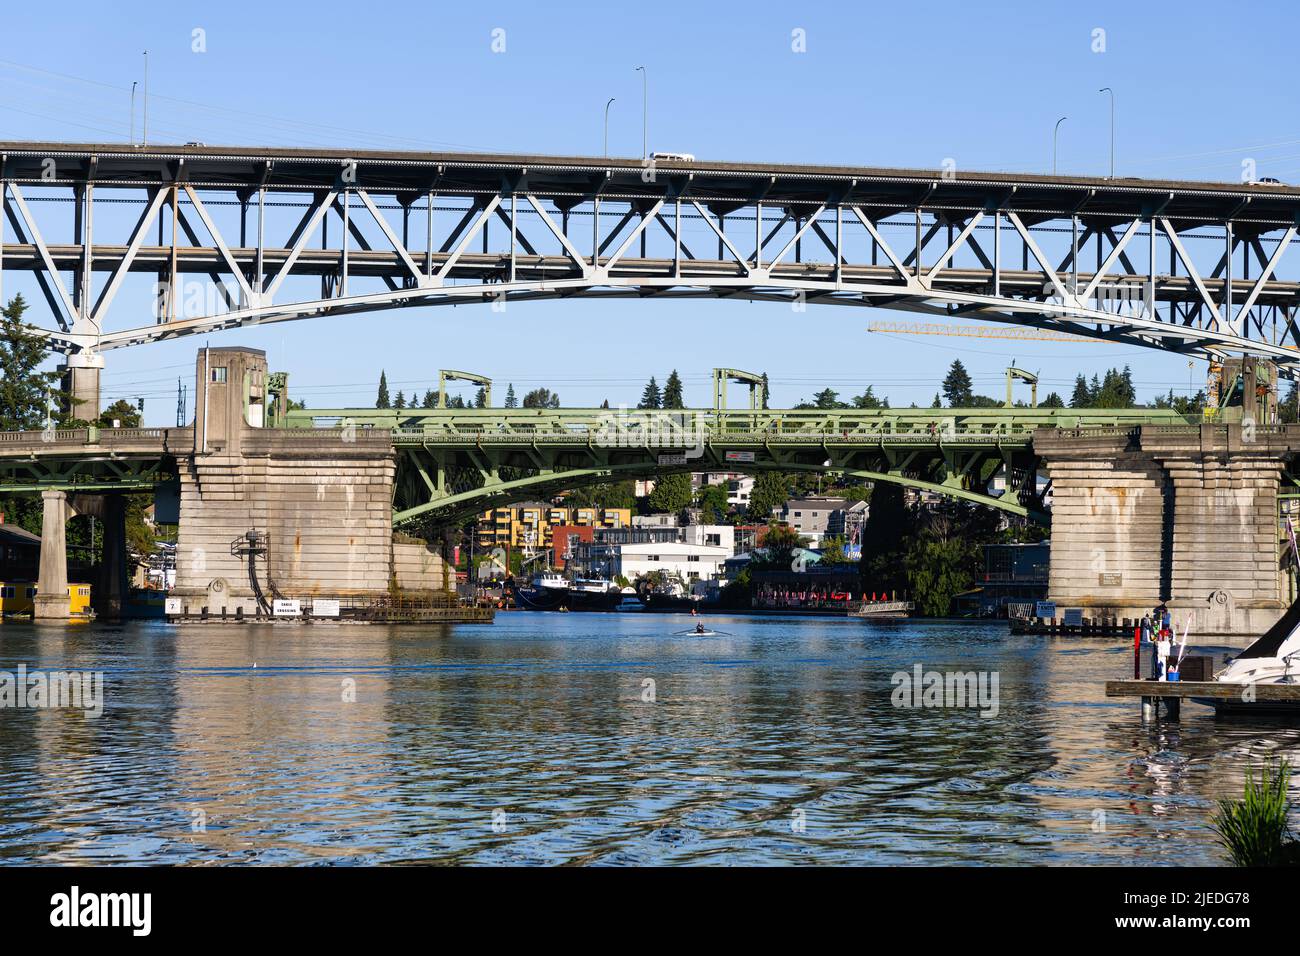 Seattle - June 25, 2022; Interstate 5 on the Ship Canal Bridge towers over the University Bridge in Seattle on a blue sky summer morning Stock Photo